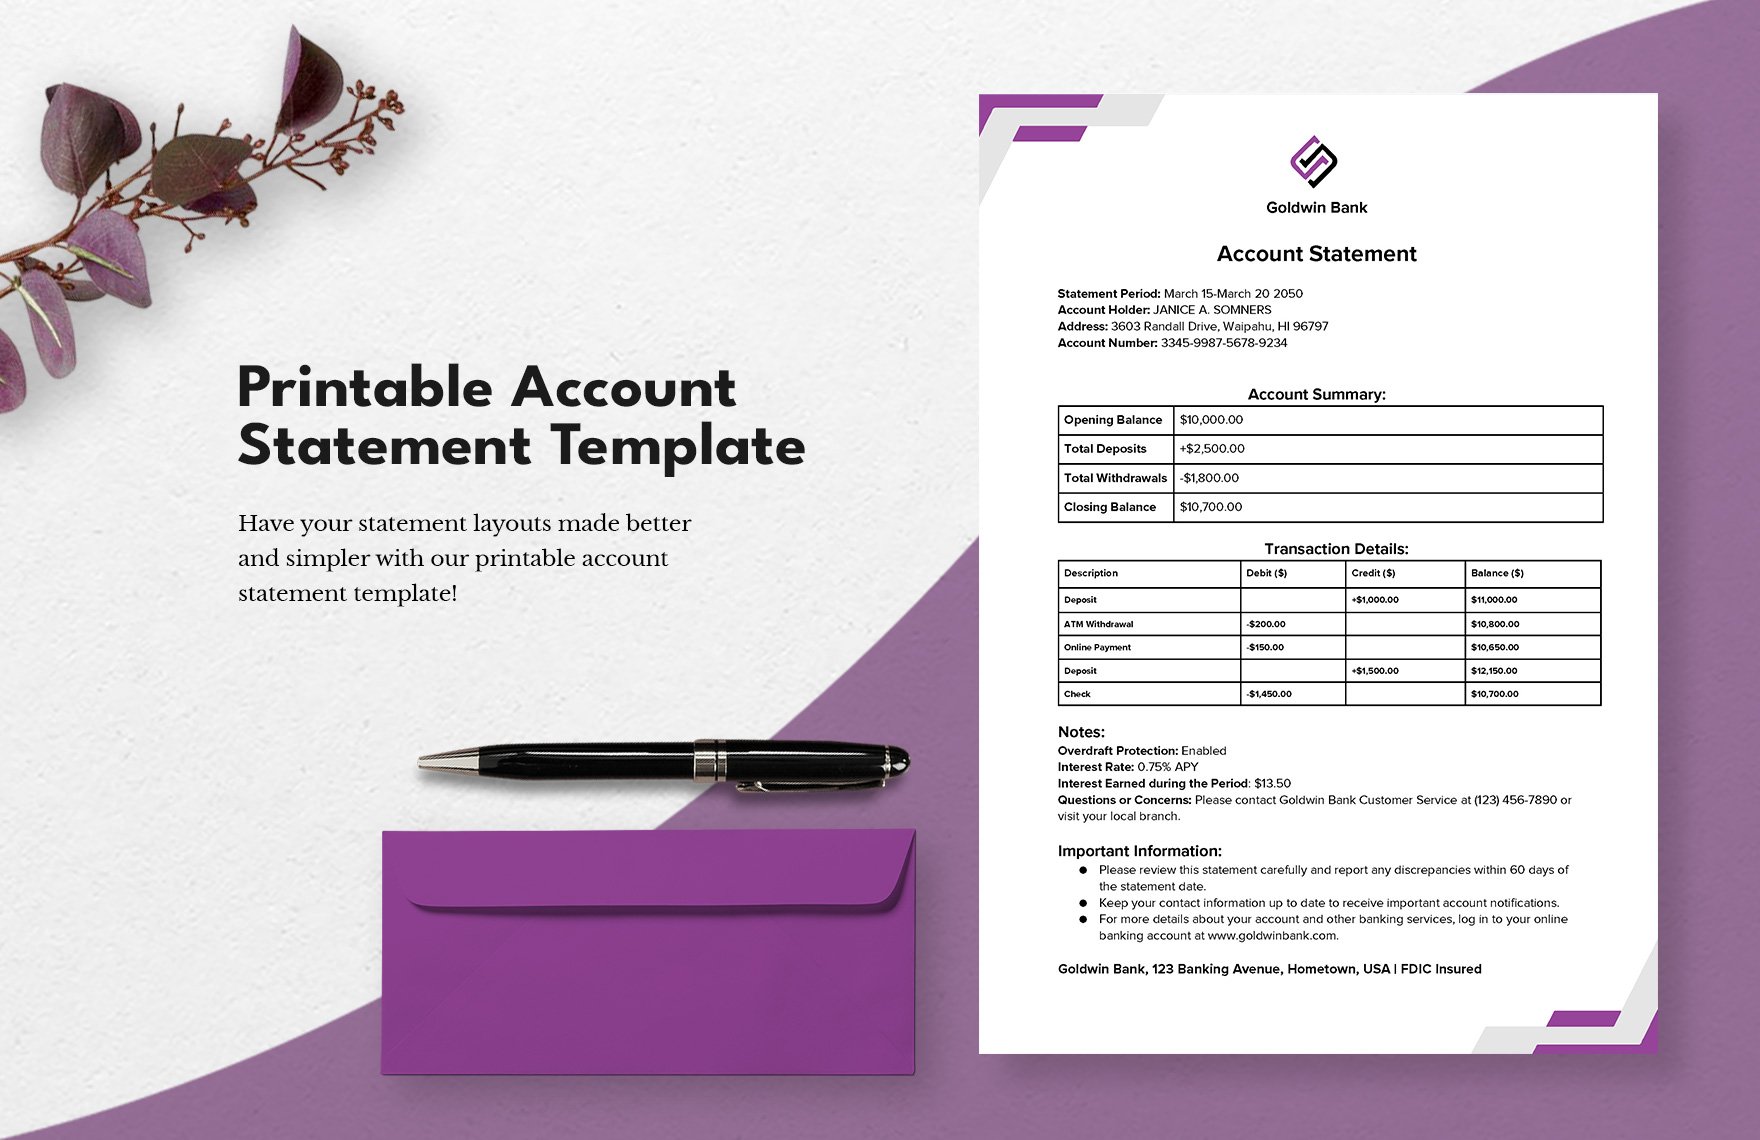 Printable Account Statement Template